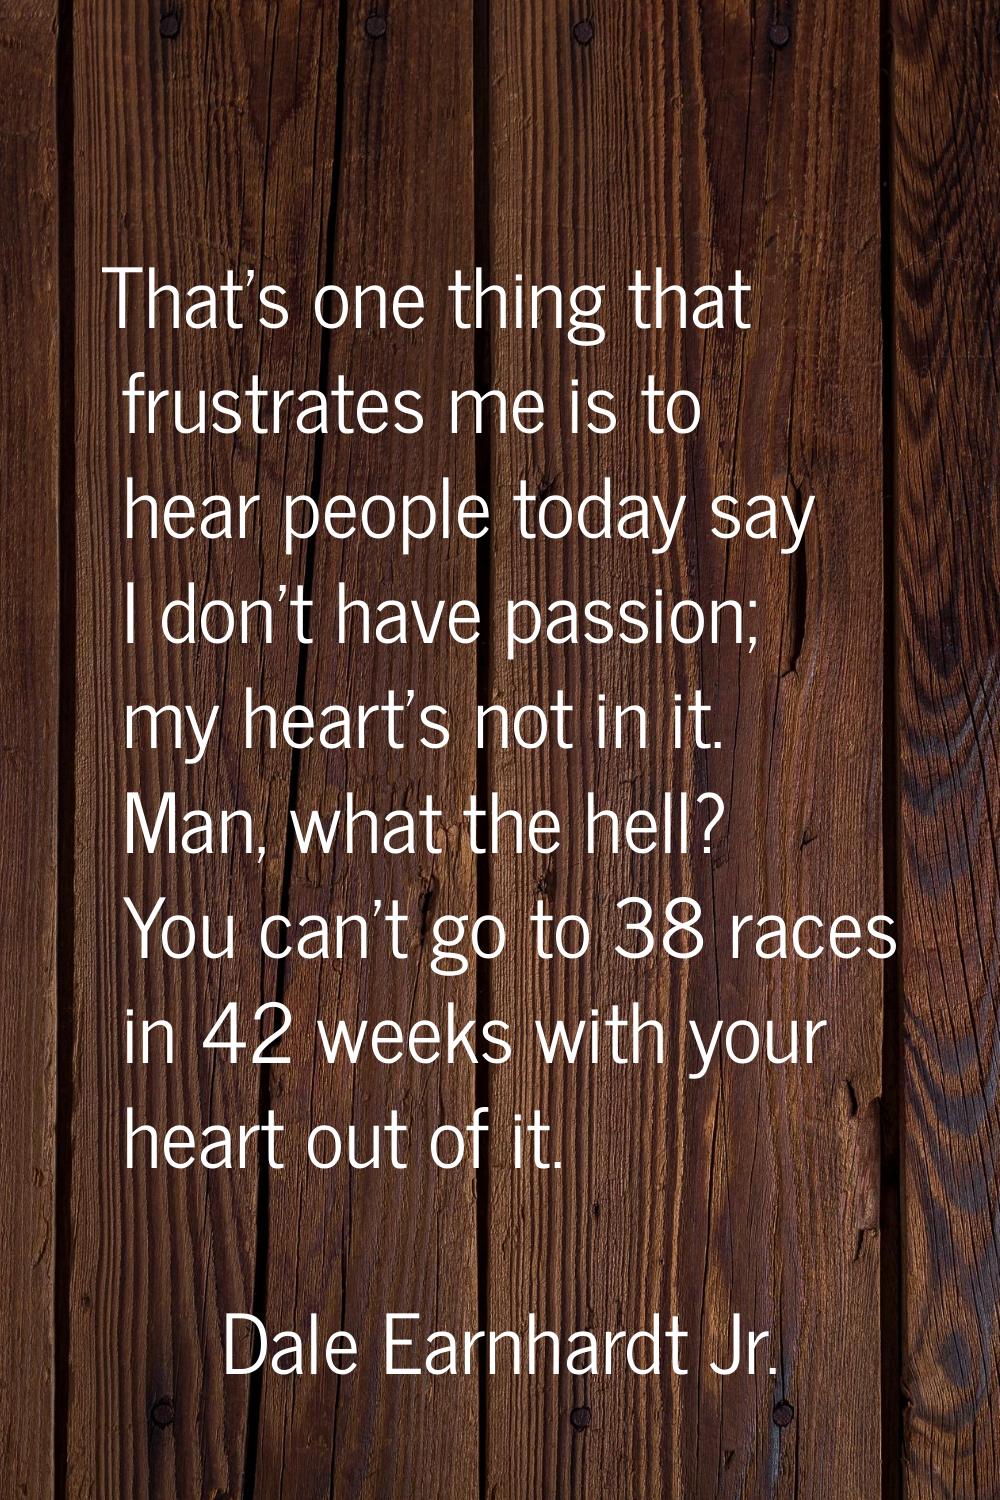 That's one thing that frustrates me is to hear people today say I don't have passion; my heart's no